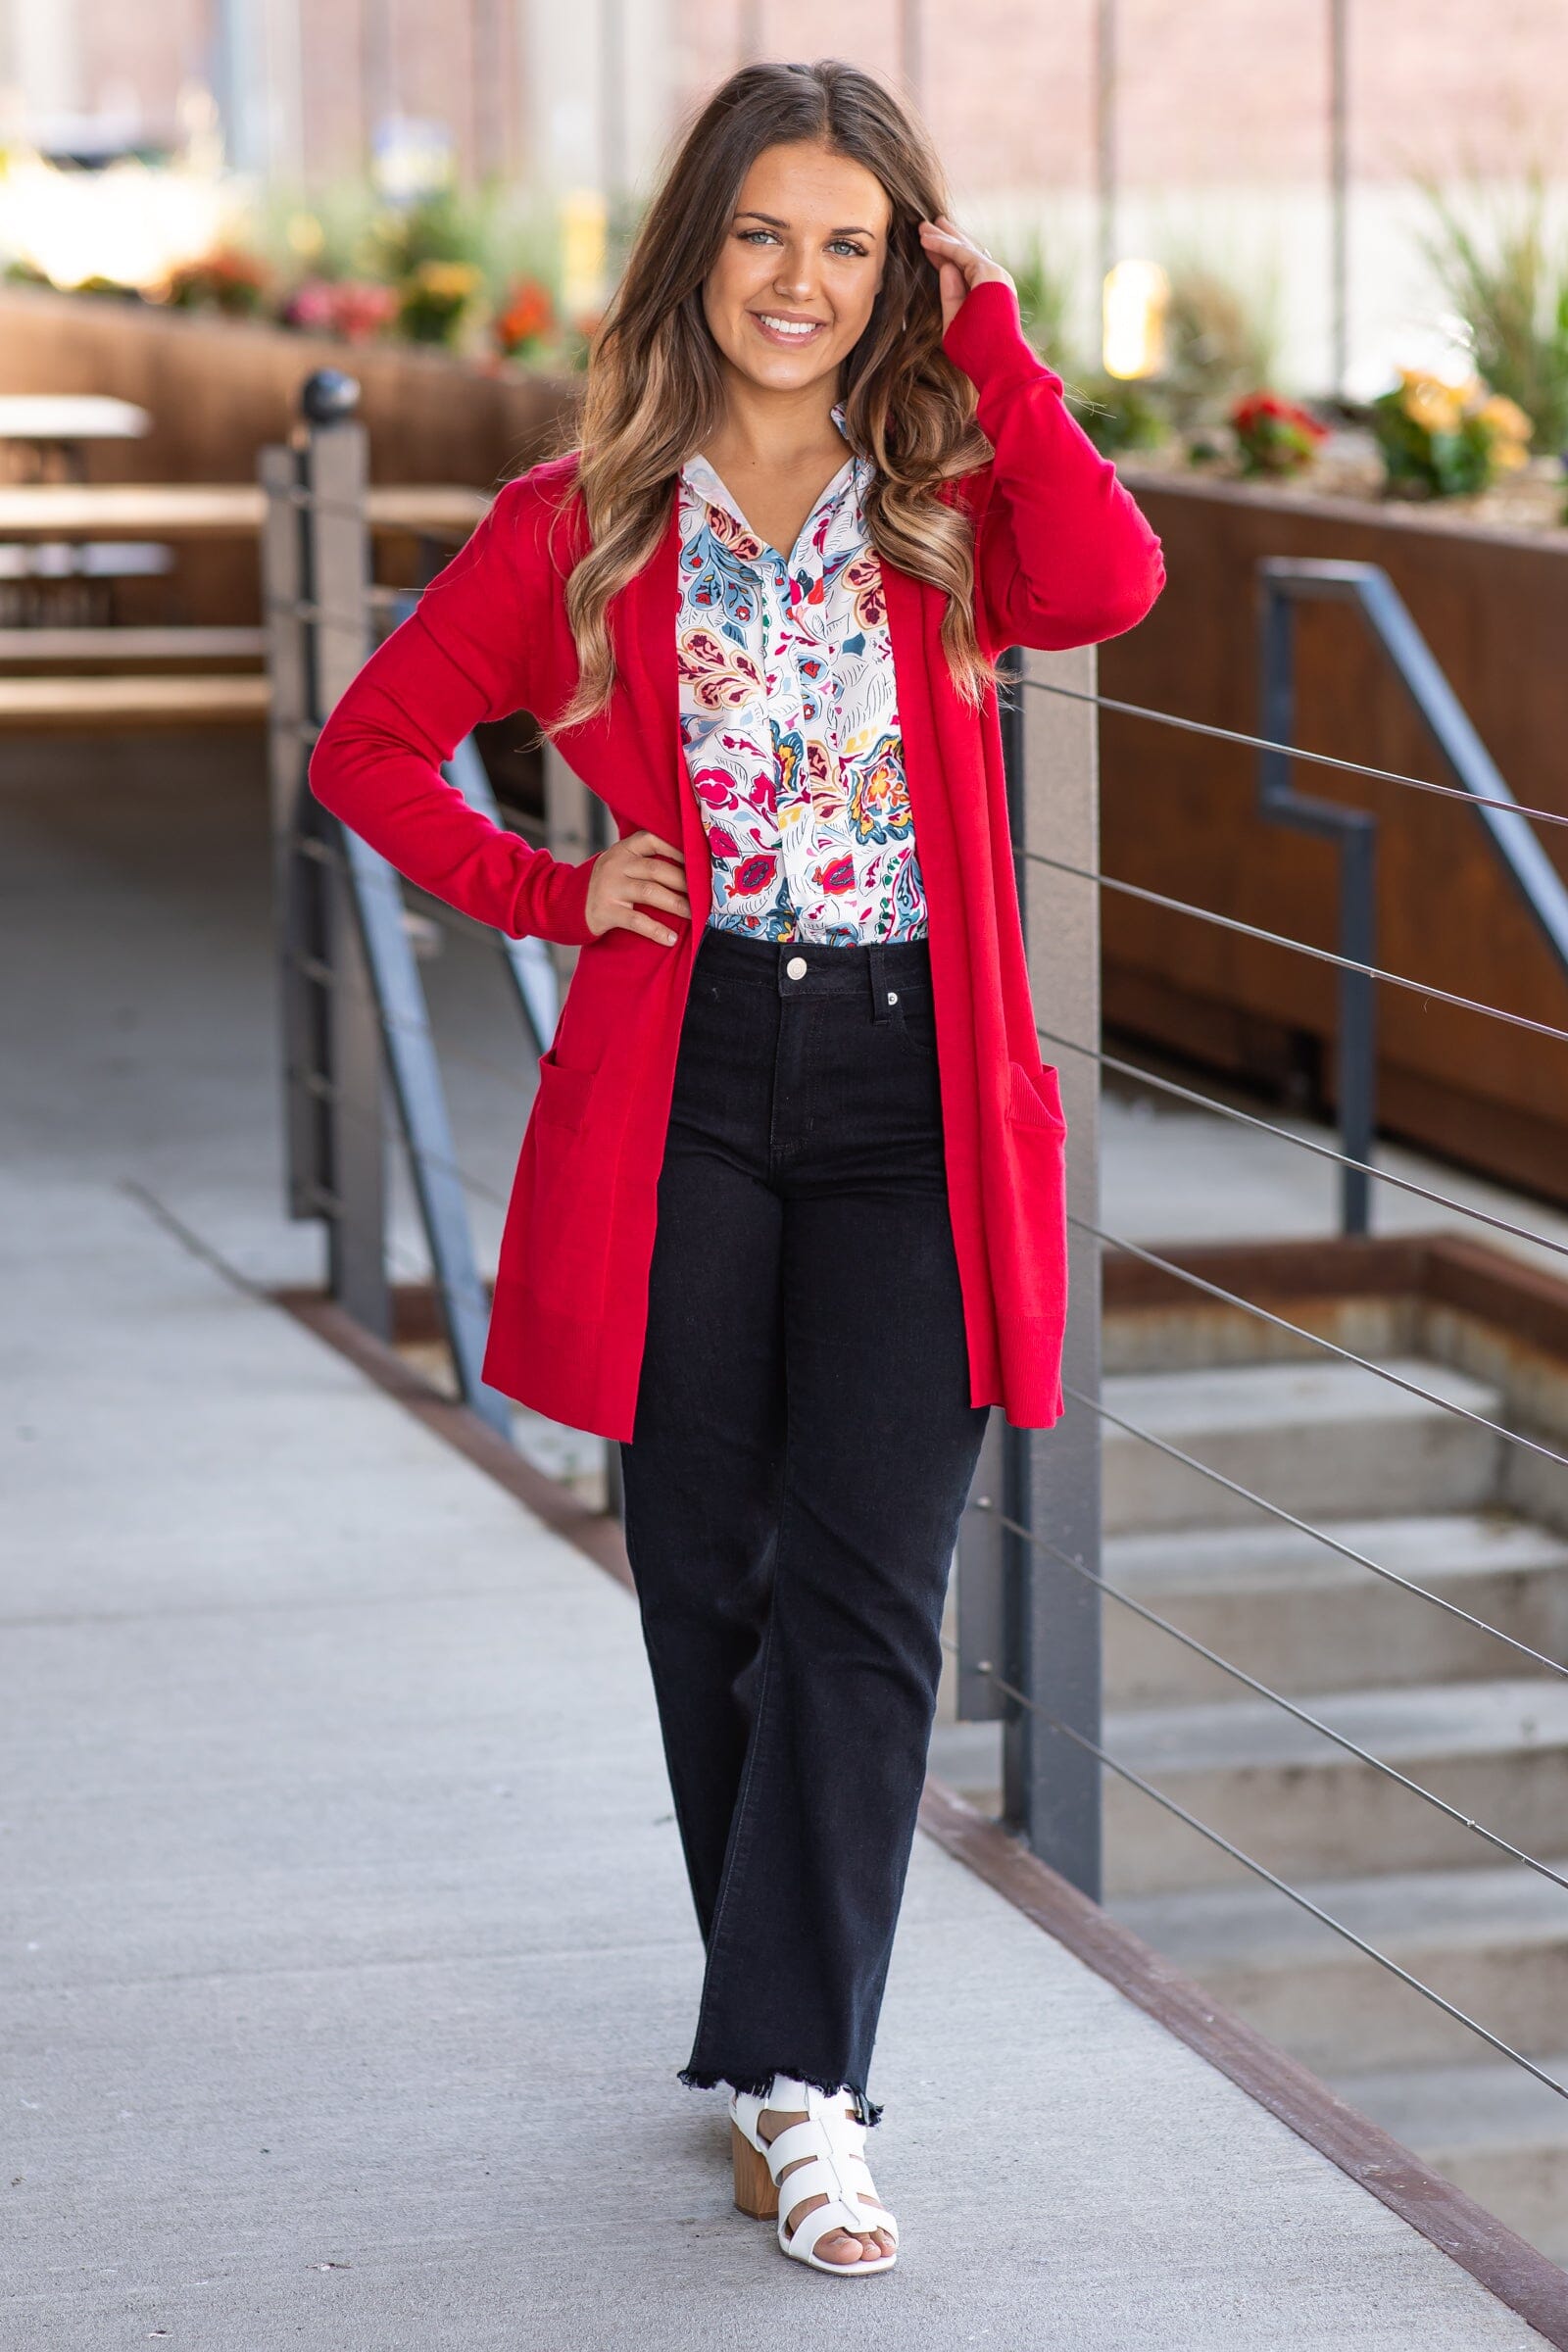 Red Lightweight Mid Length Cardigan - Filly Flair